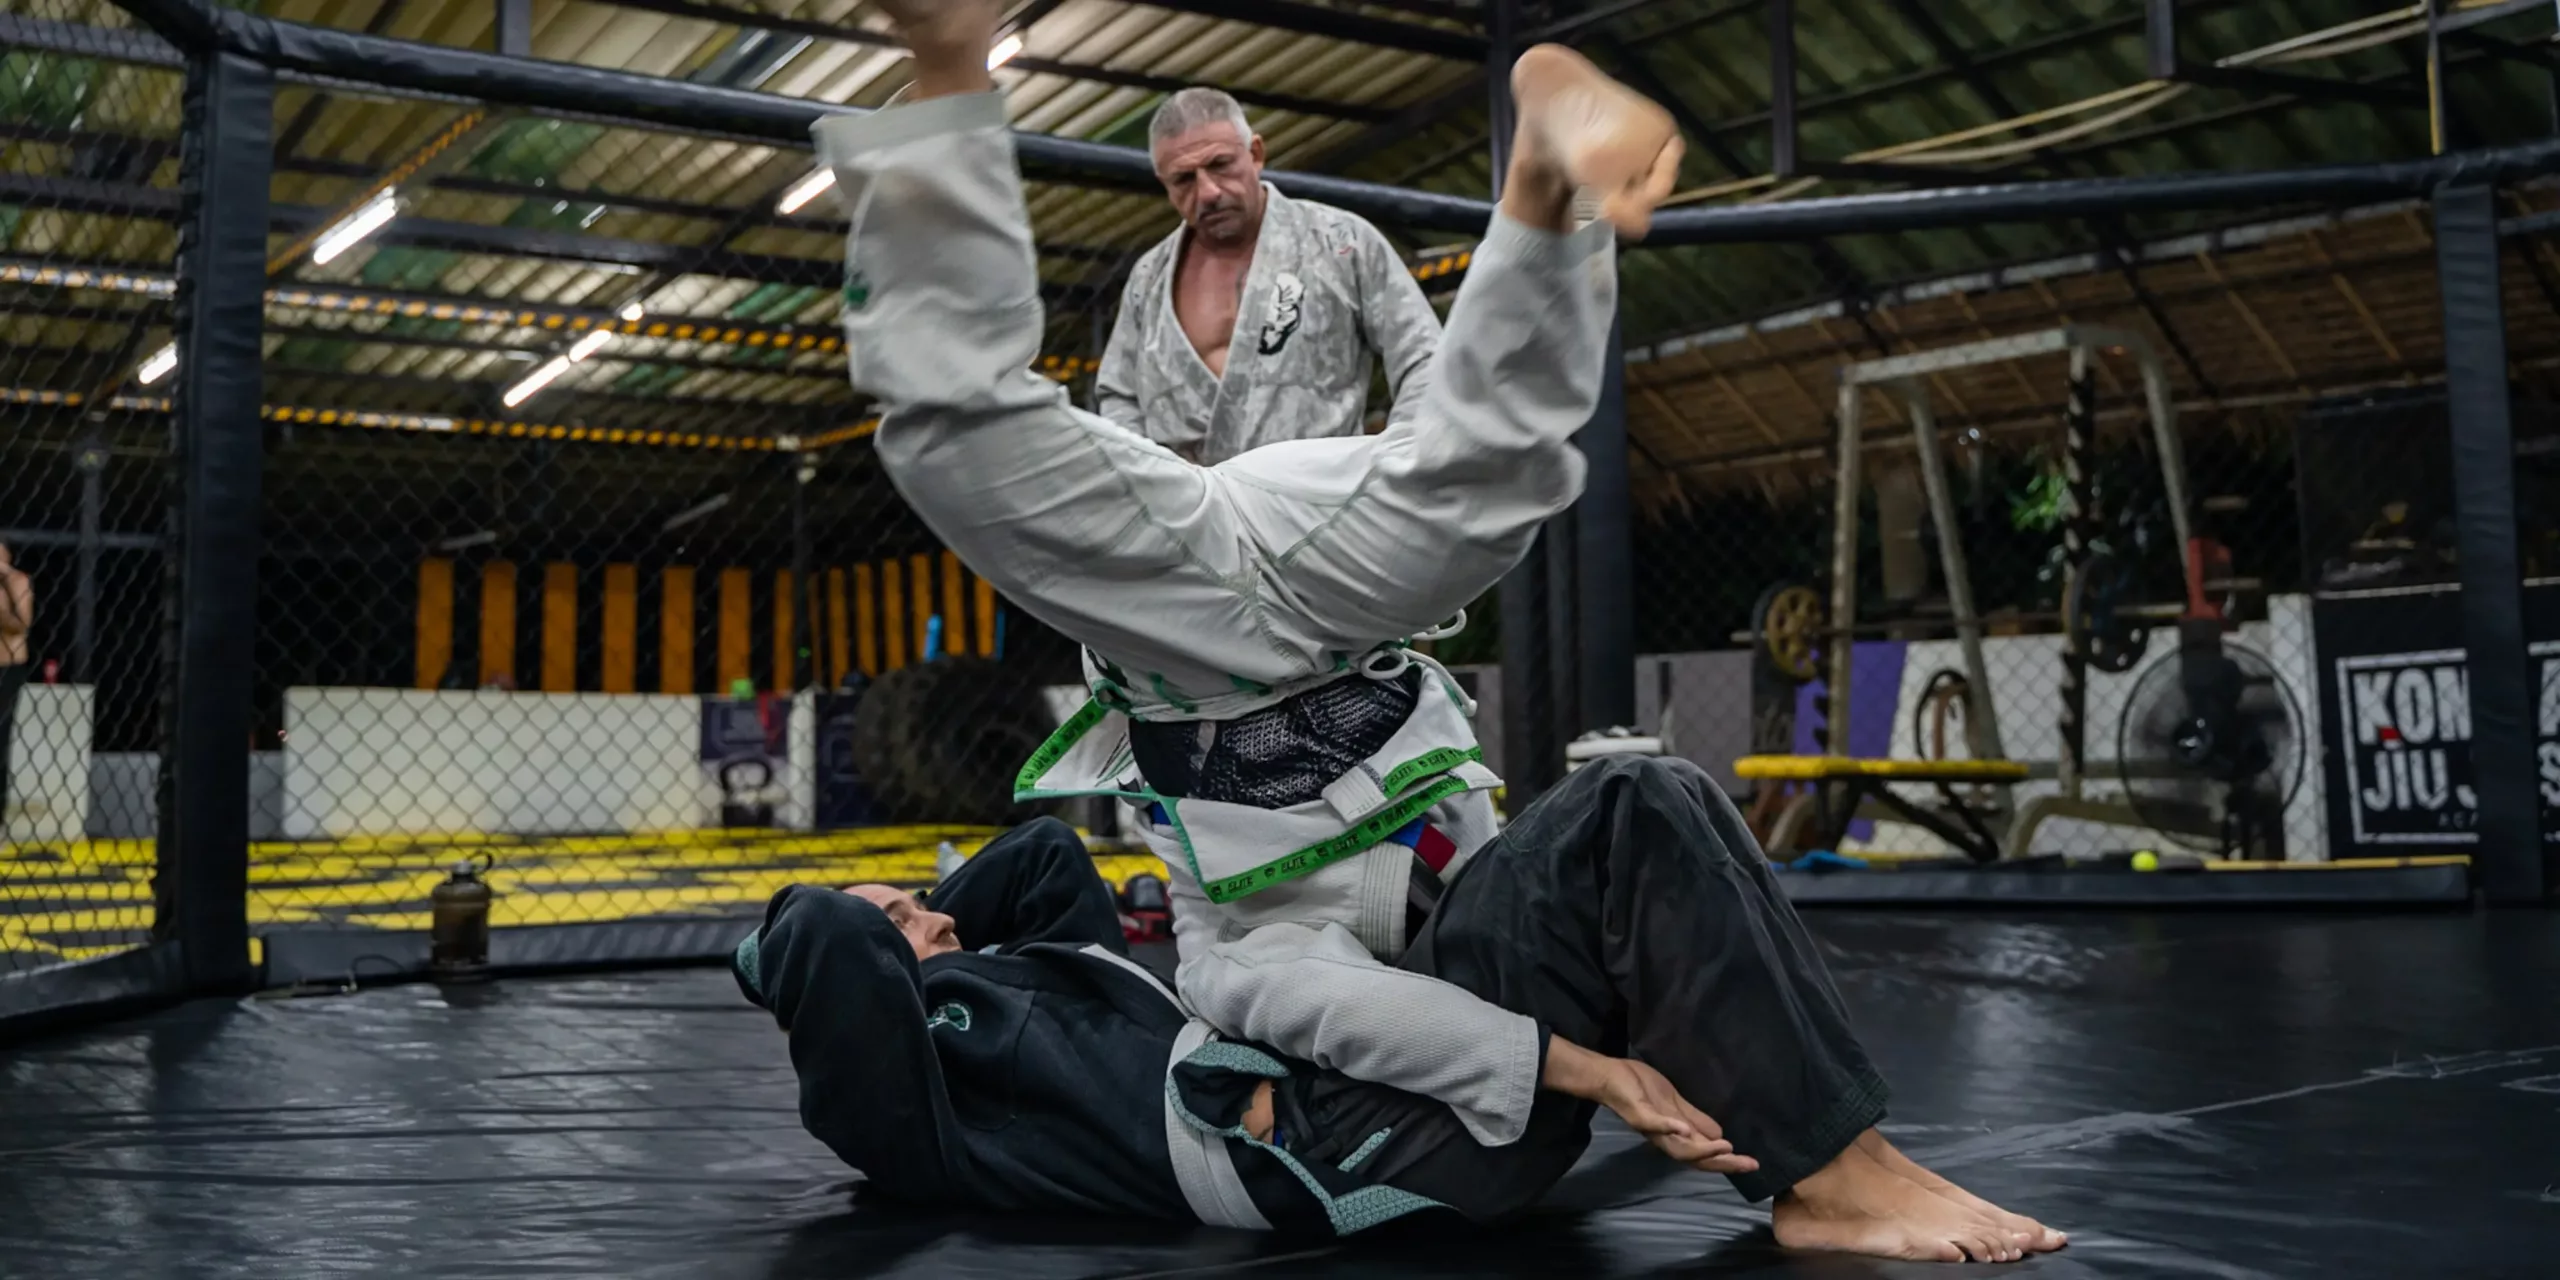 A Brazilian Jiu-Jitsu student in a white gi performs a sweeping technique from the bottom, lifting his opponent into the air, with their instructor supervising the drill in the dojo.